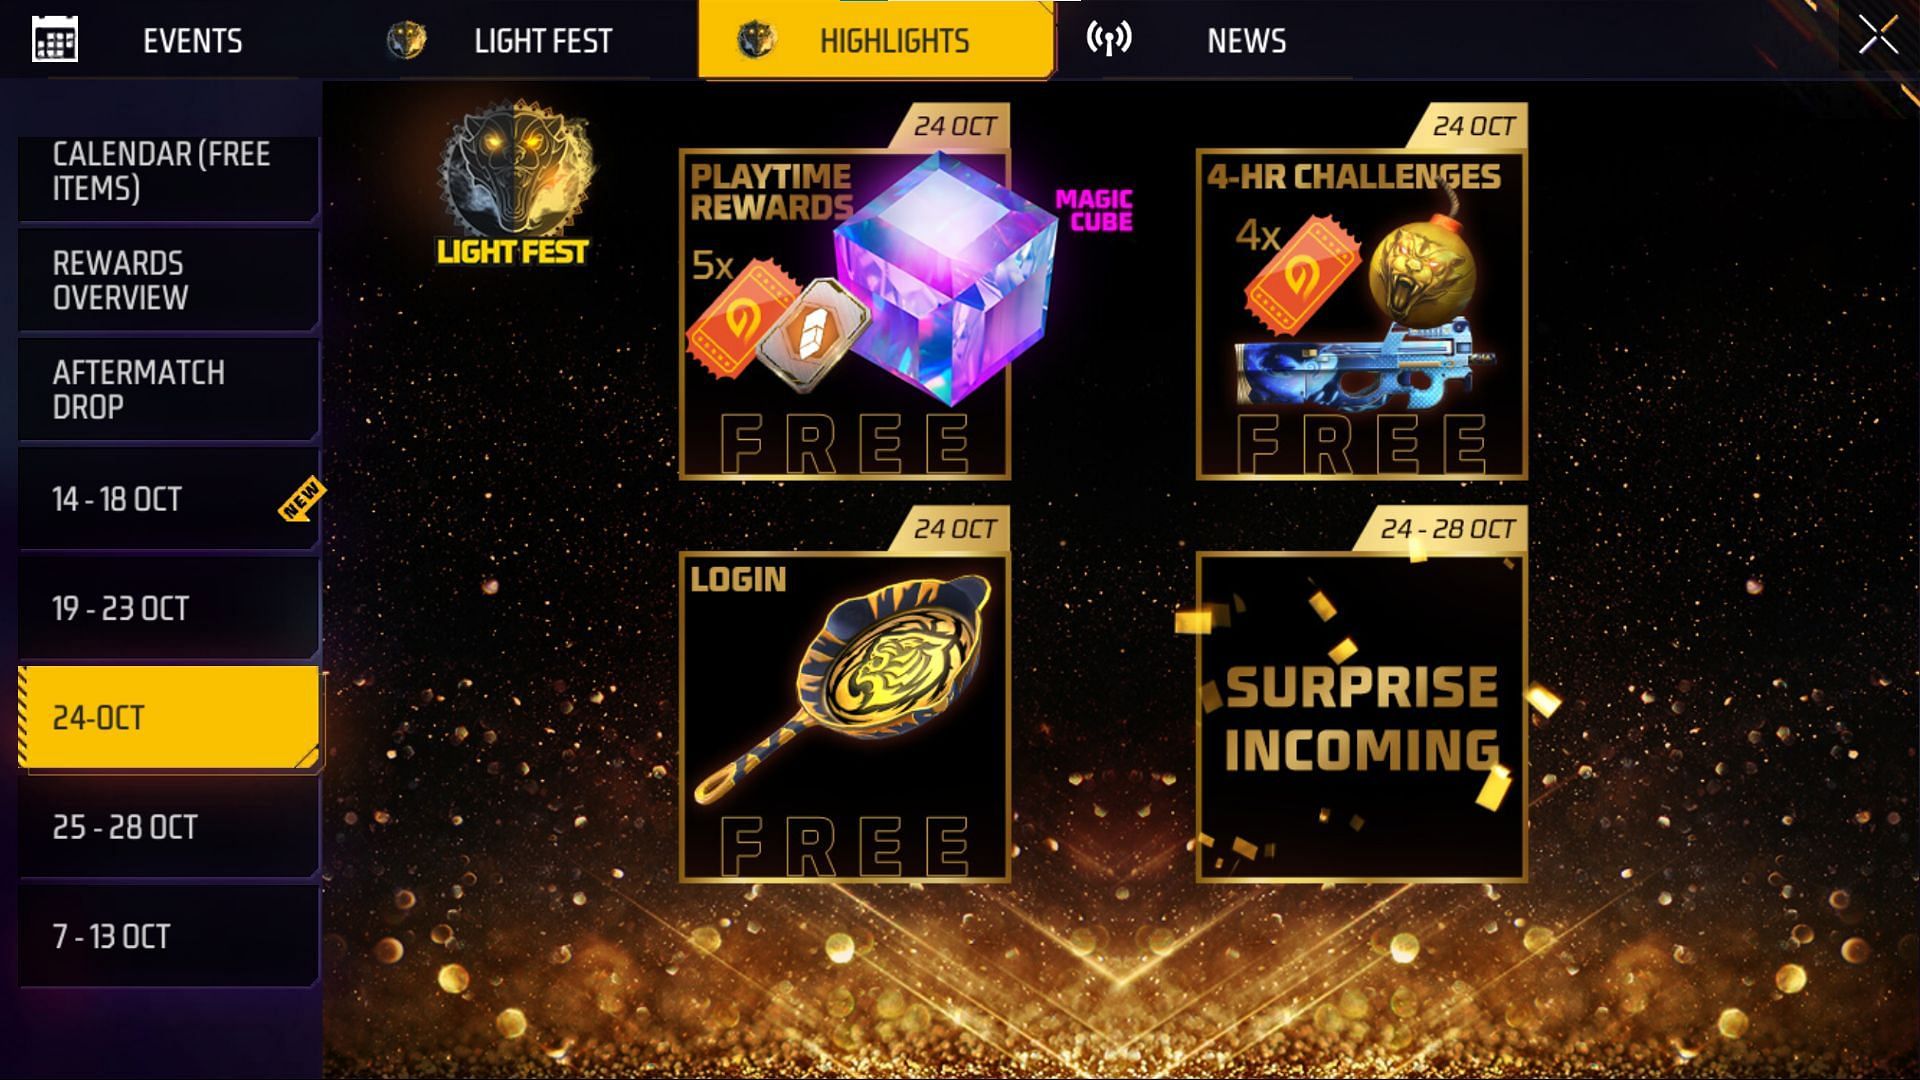 The leak day will bring more exciting activities for players (Image via Garena)